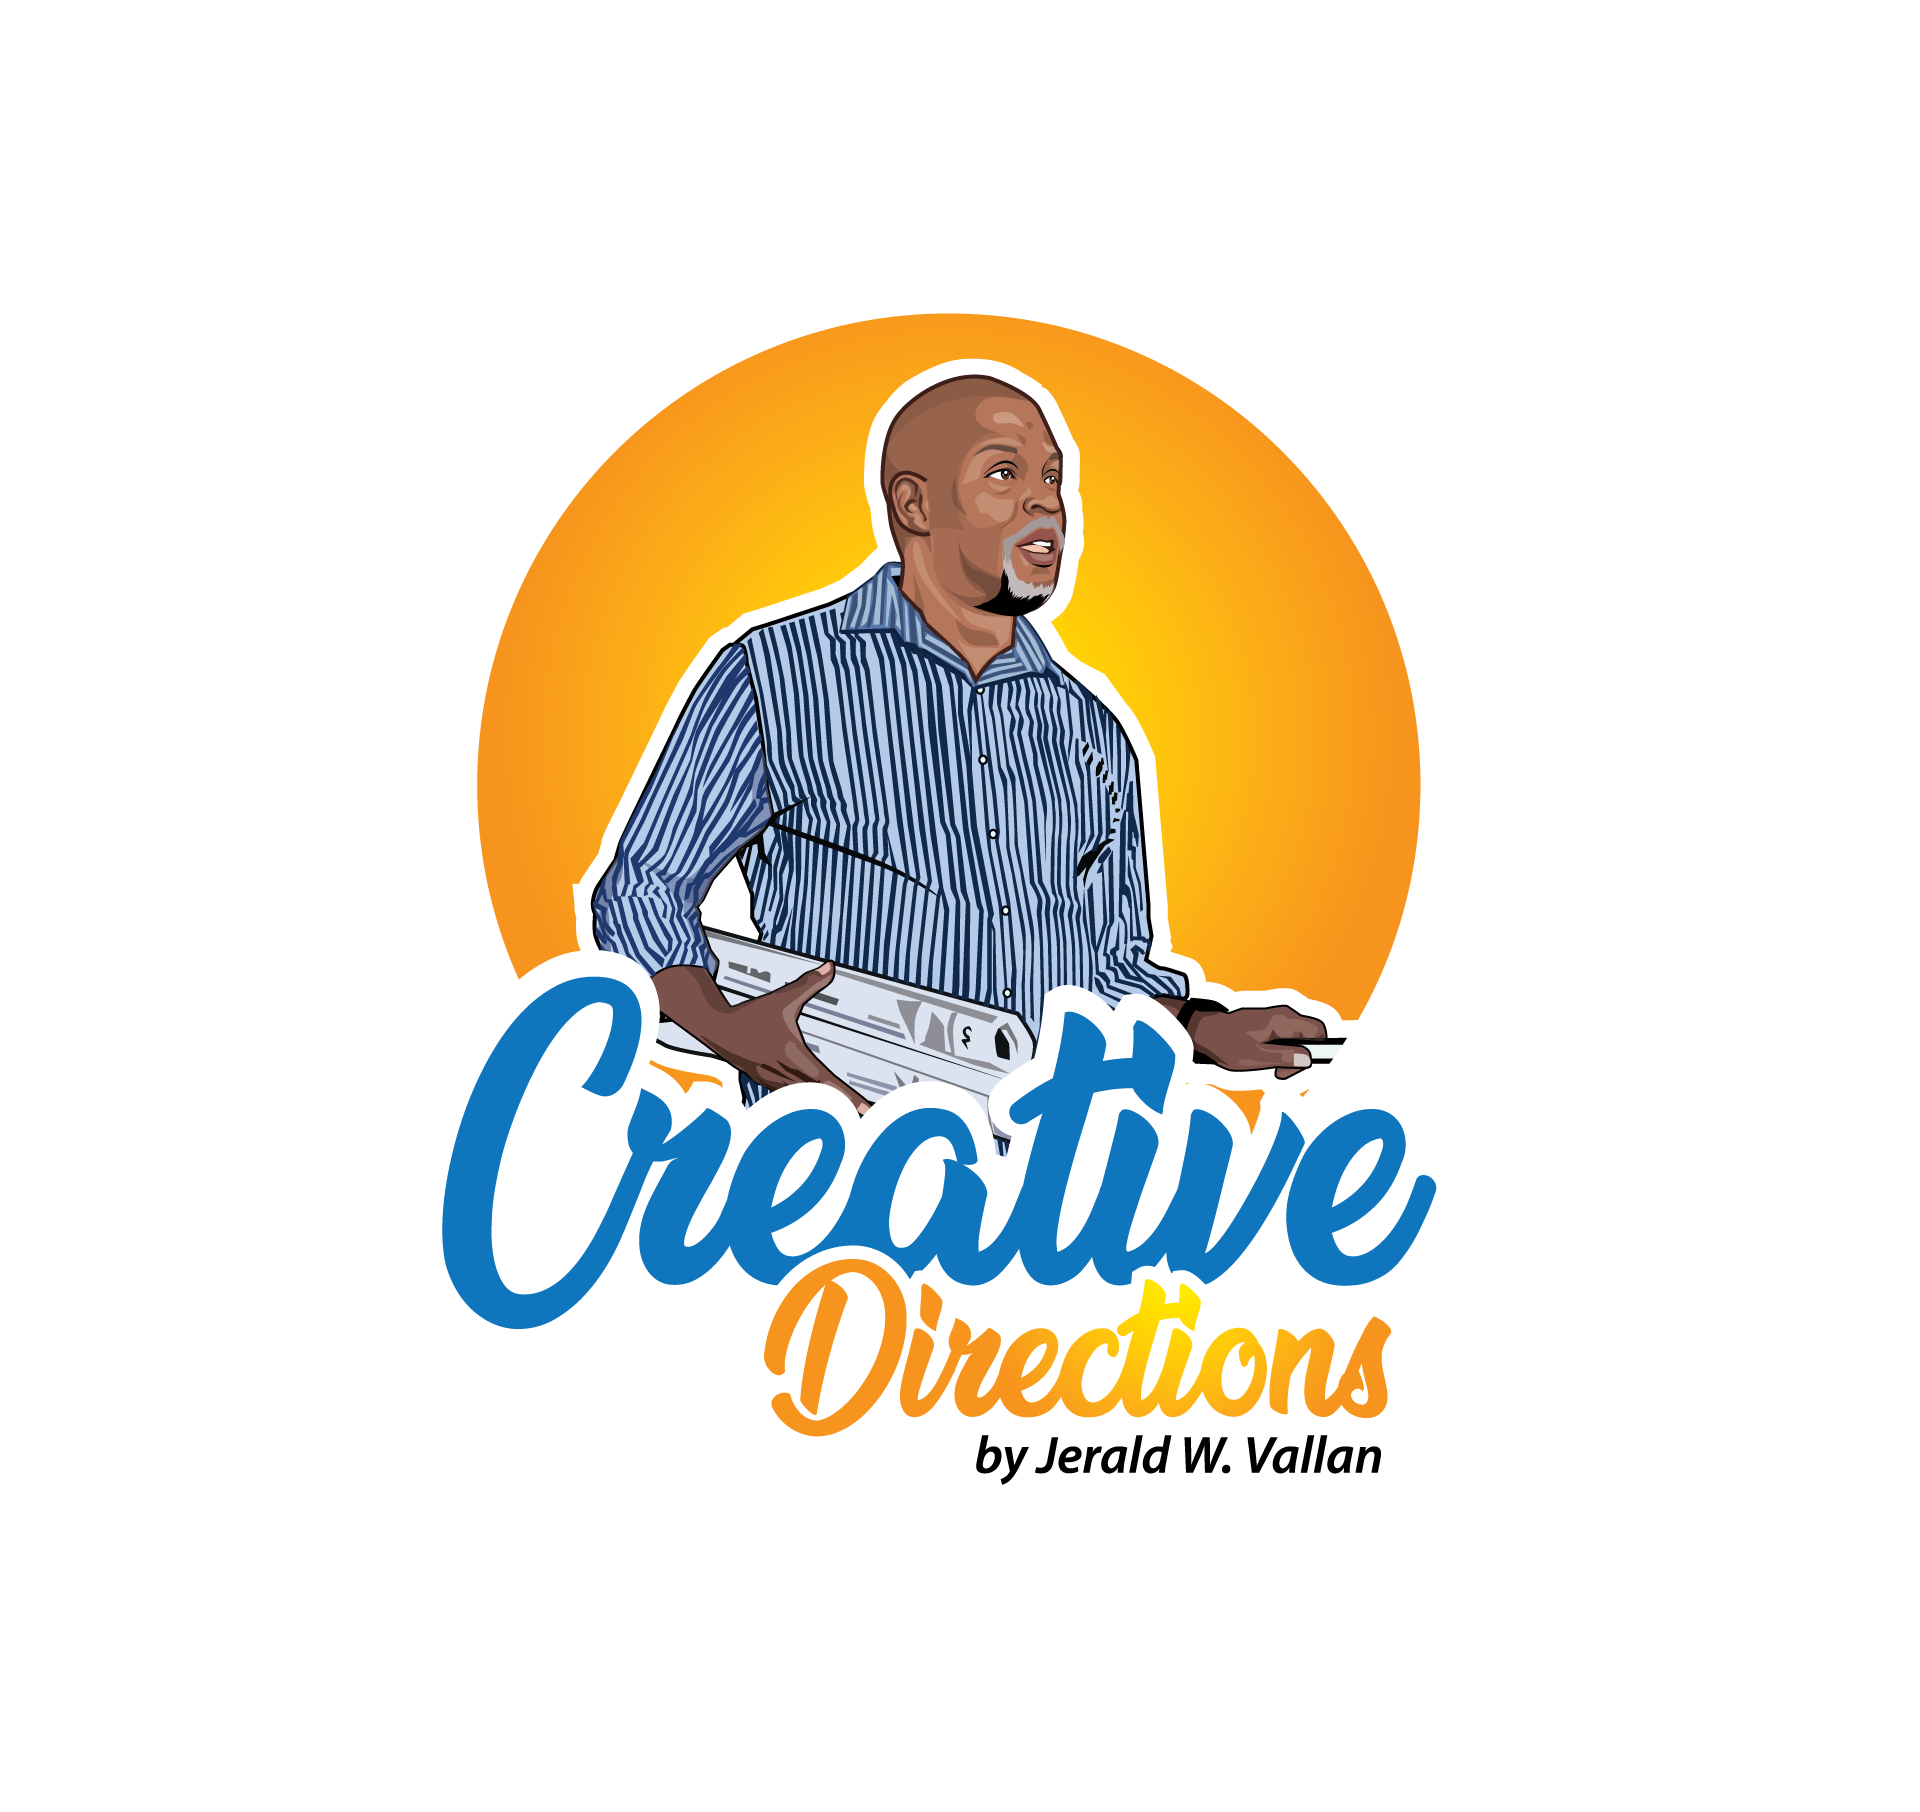 Creative Directions by Jerald W. Vallan Logo